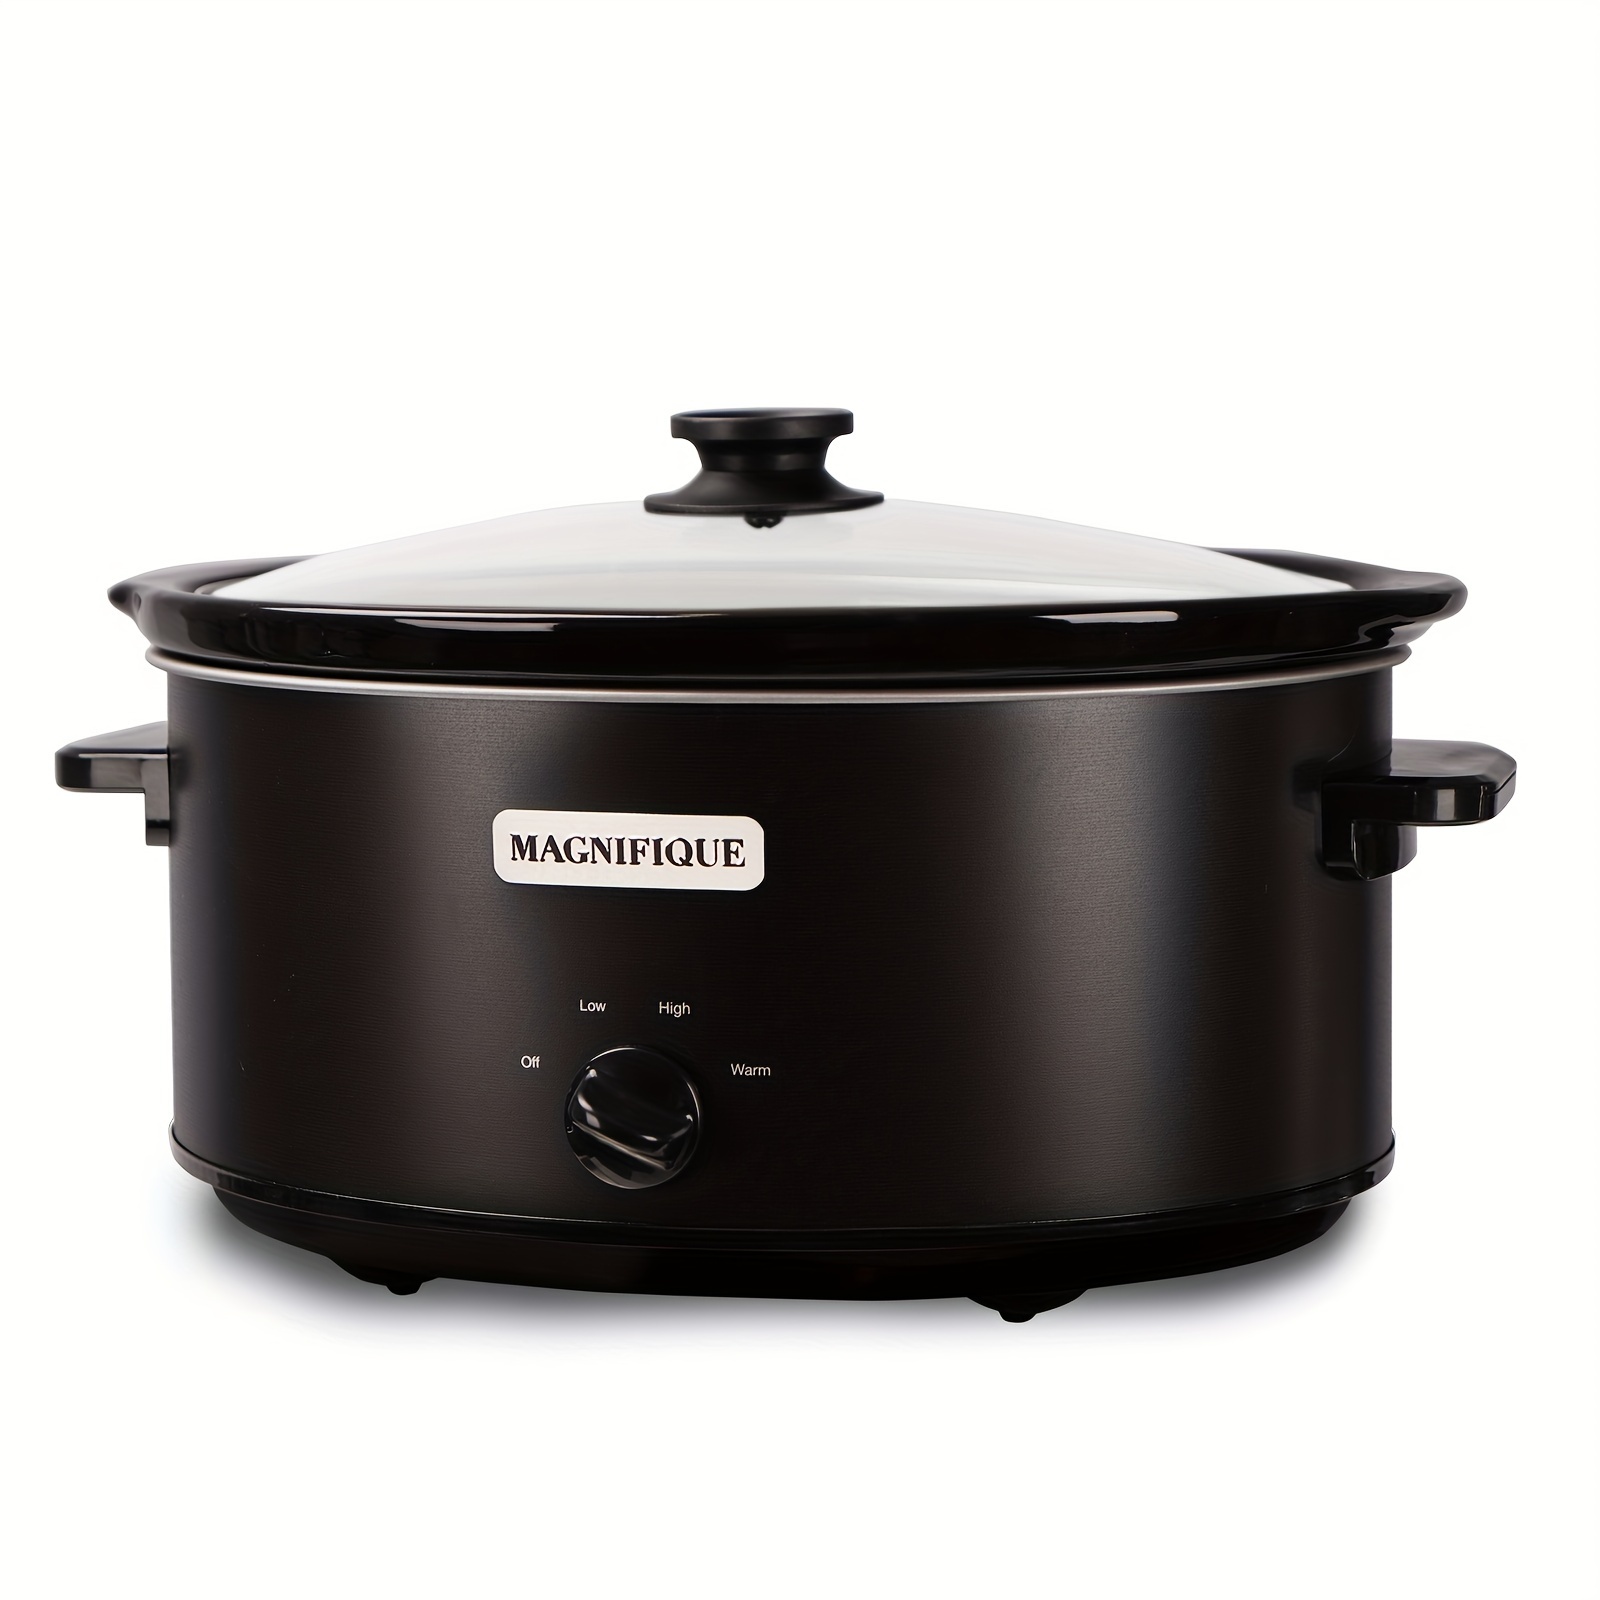 

8 Quart Slow Cooker Oval Manual Pot Food Warmer With 3 Cooking Settings, Black Stainless Steel